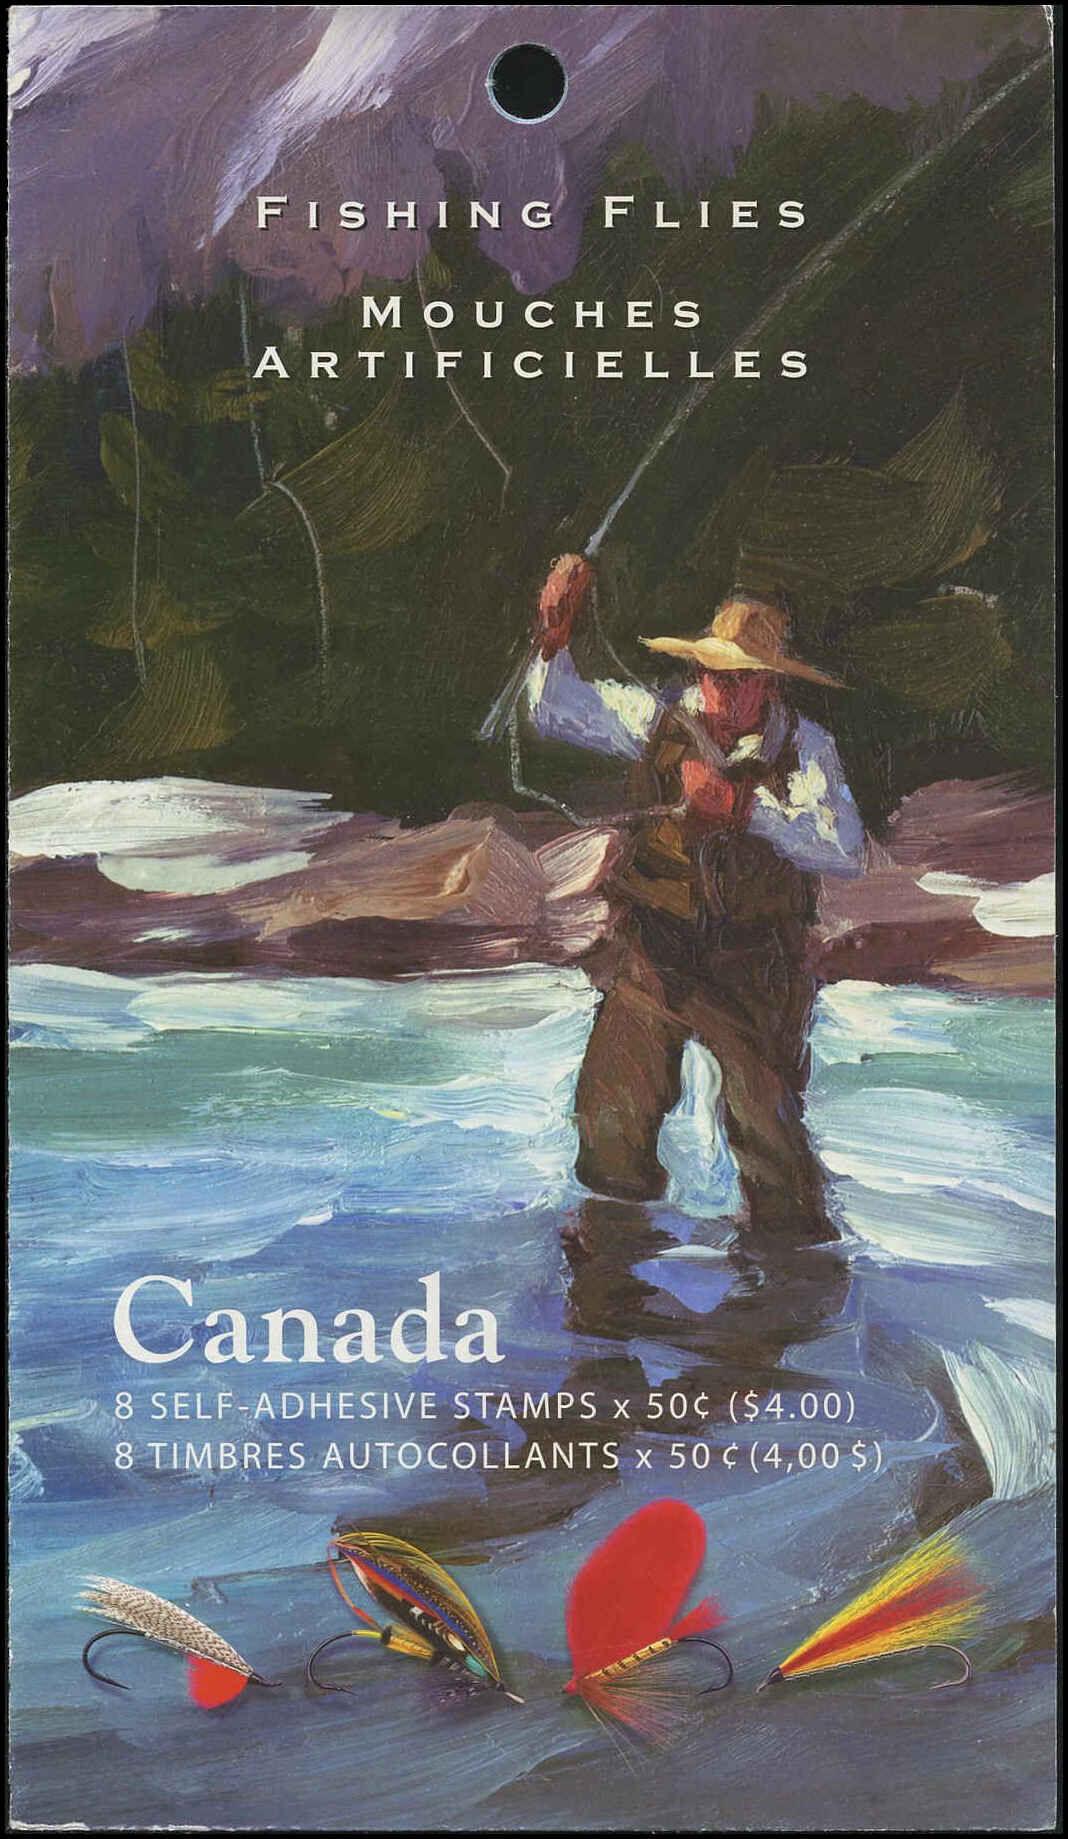 Buy Canada #2088 - Fishing Flies (2005) 4 x 50¢ - Booklet pane of 4 stamps  (#2088a-d) (BK306)